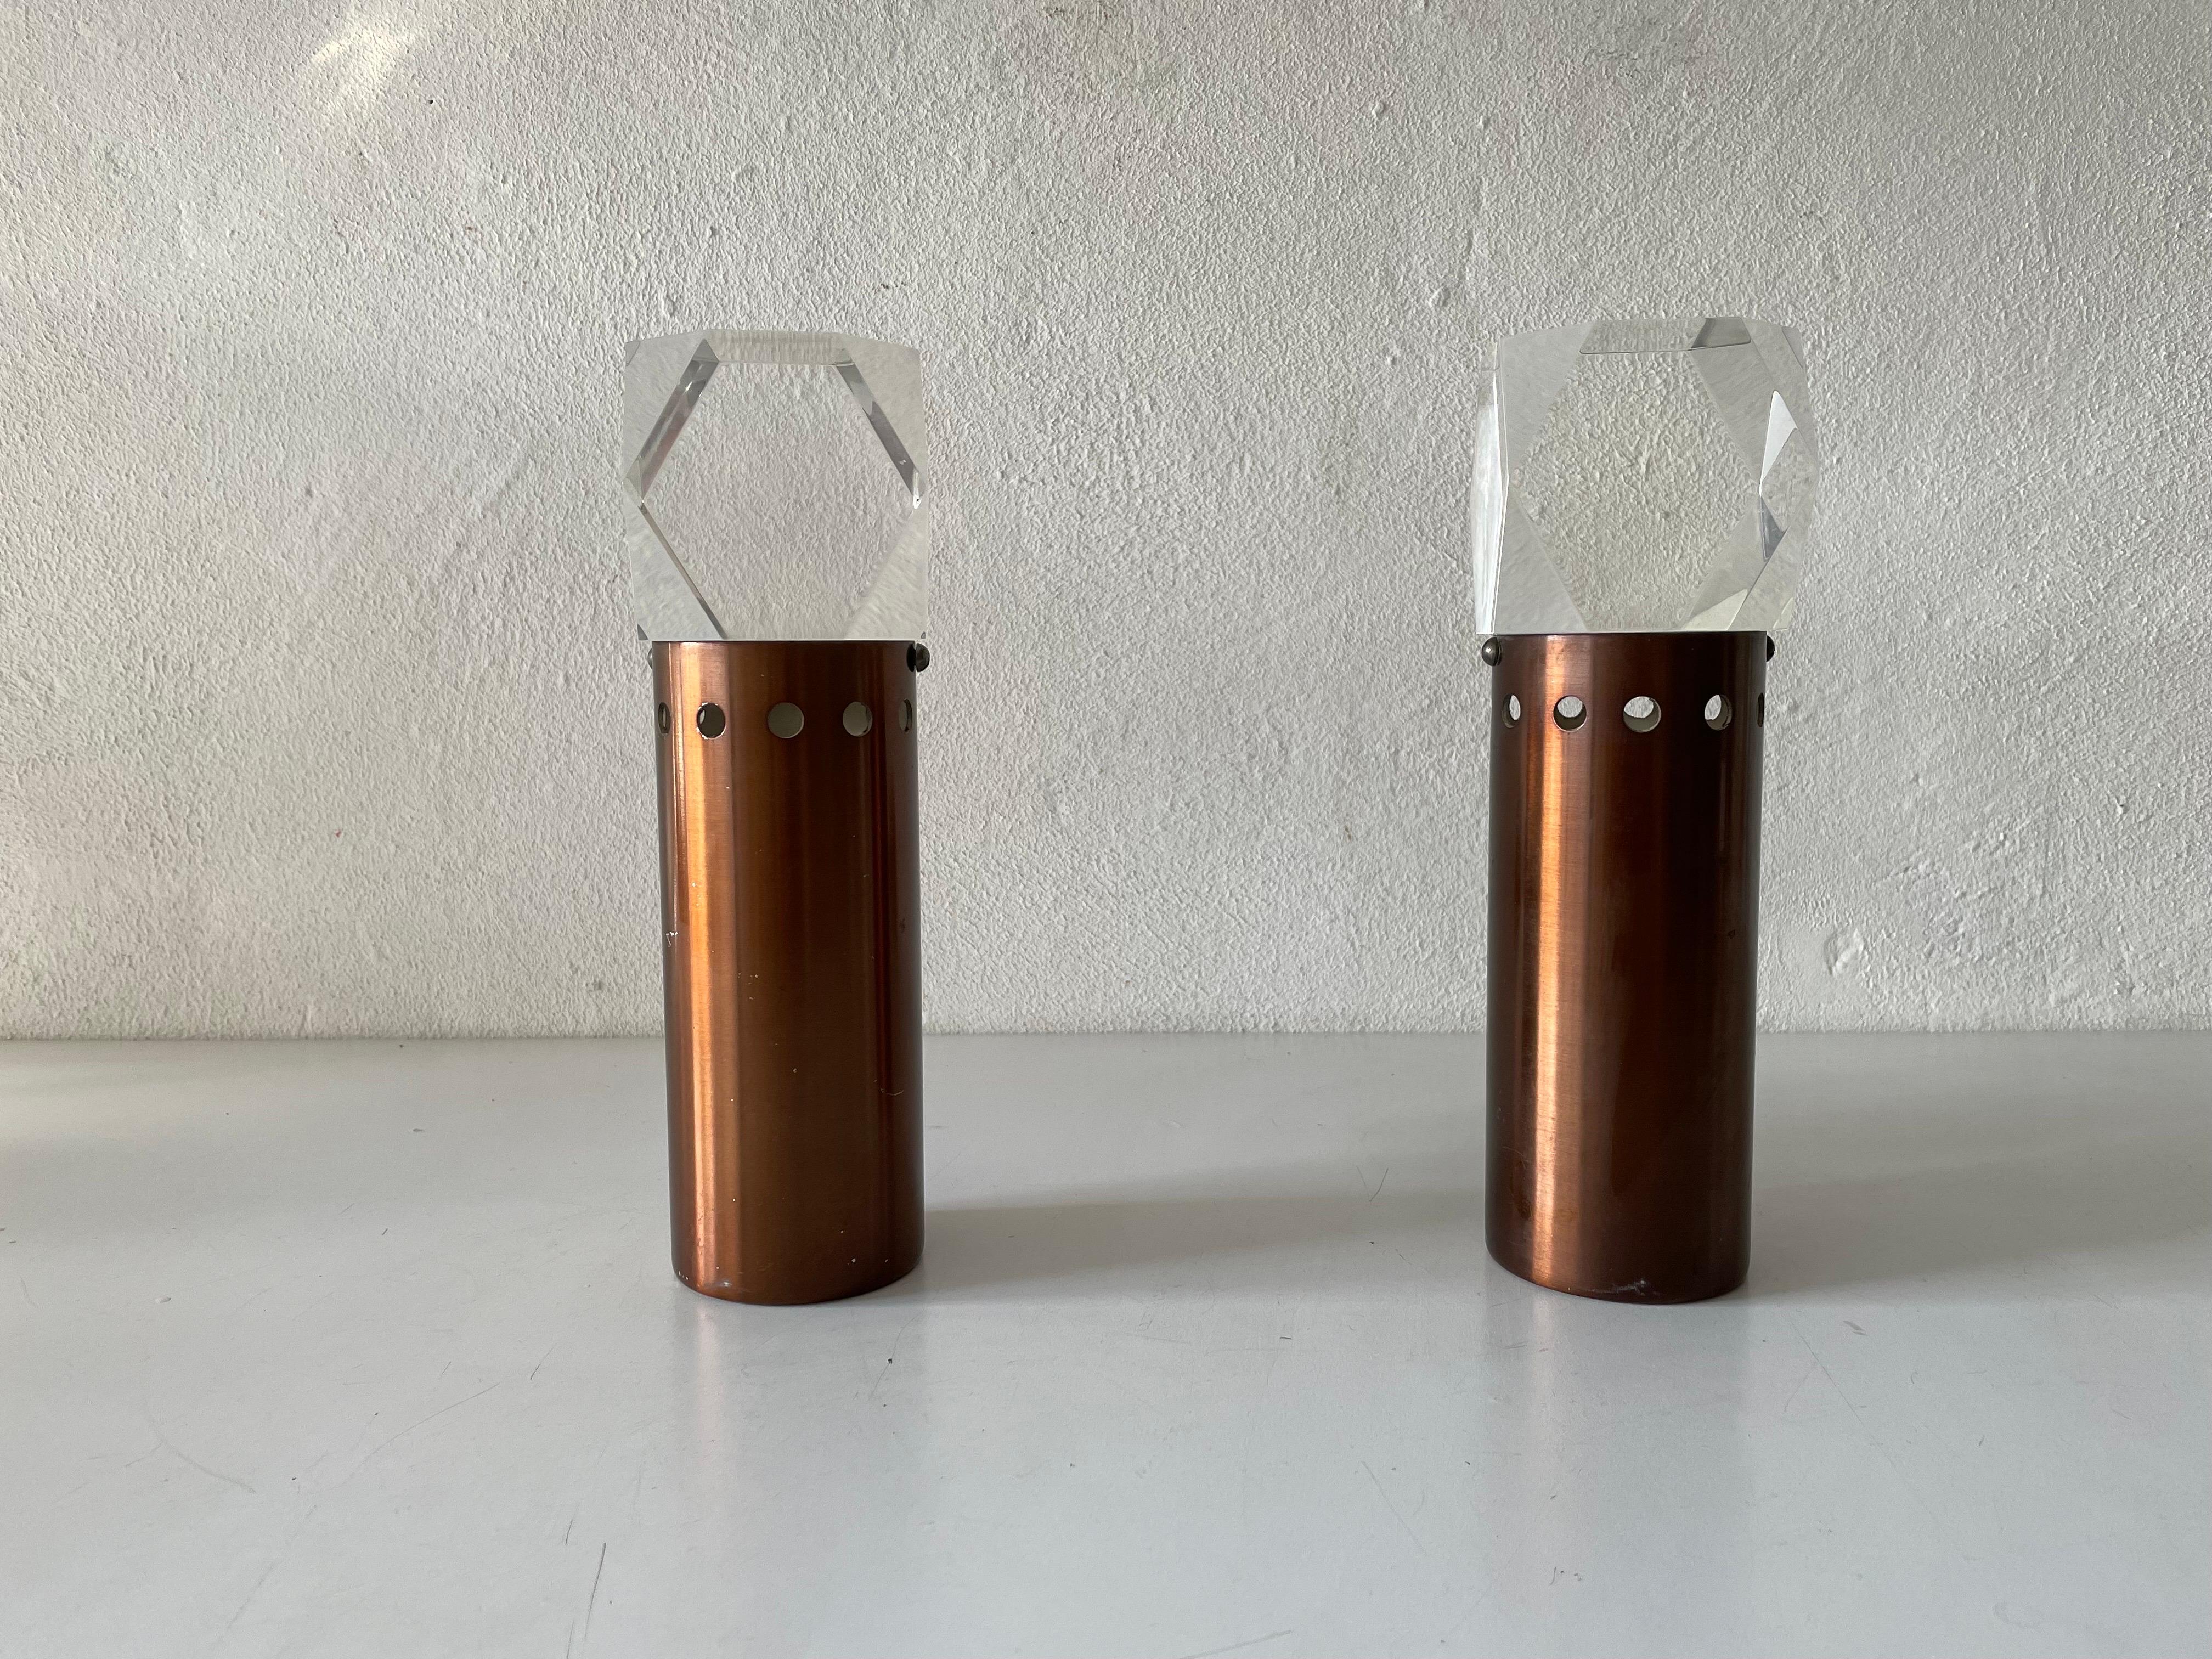 Italian Rare Copper and Glass Sculptural Pair of Sconces by Stilux Milano, 1960s, Italy For Sale